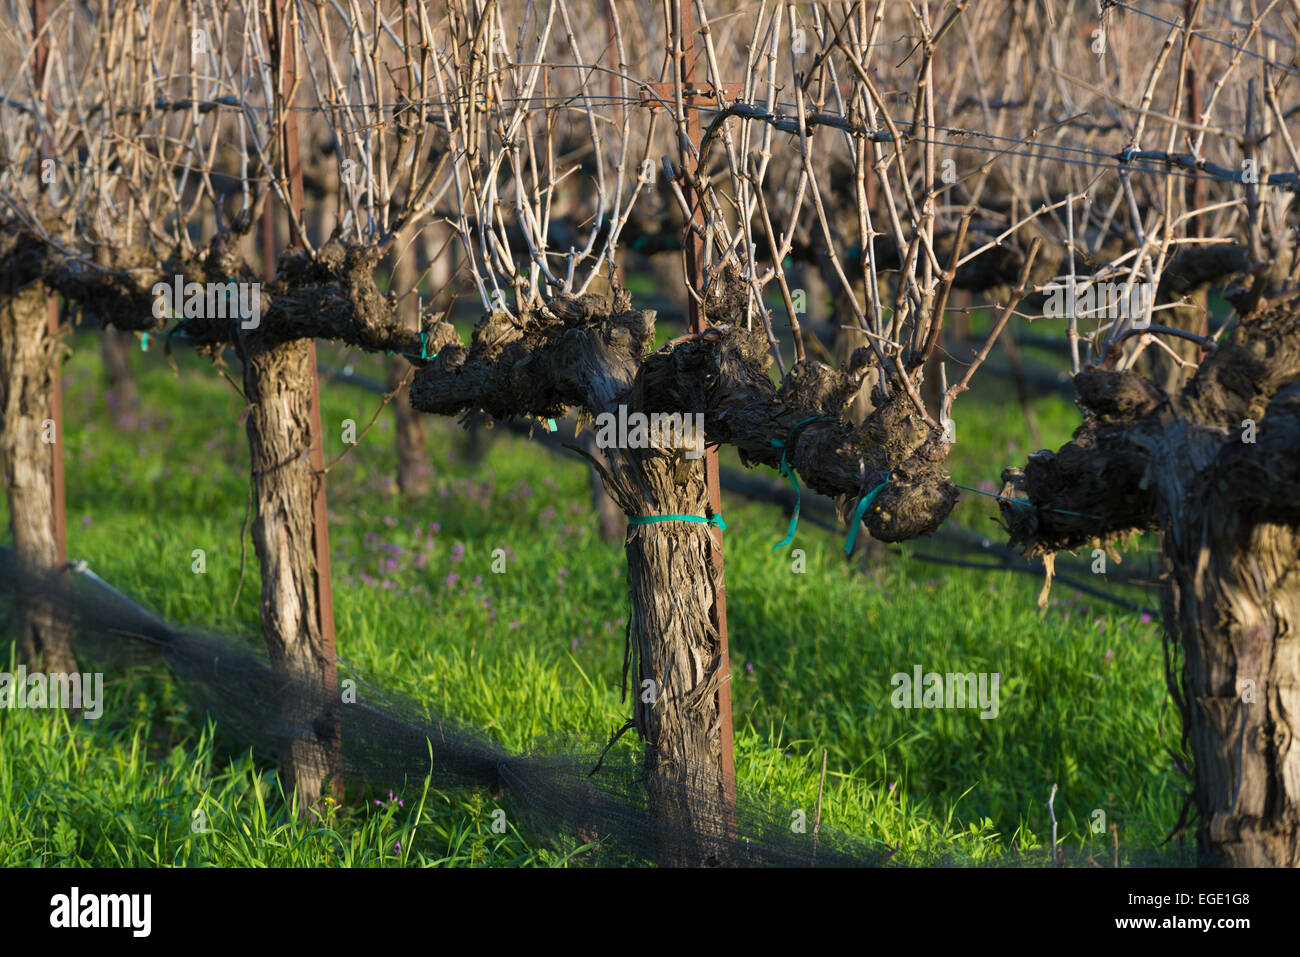 A vineyard with no leafs in California to show the vine and the branches clearly Stock Photo